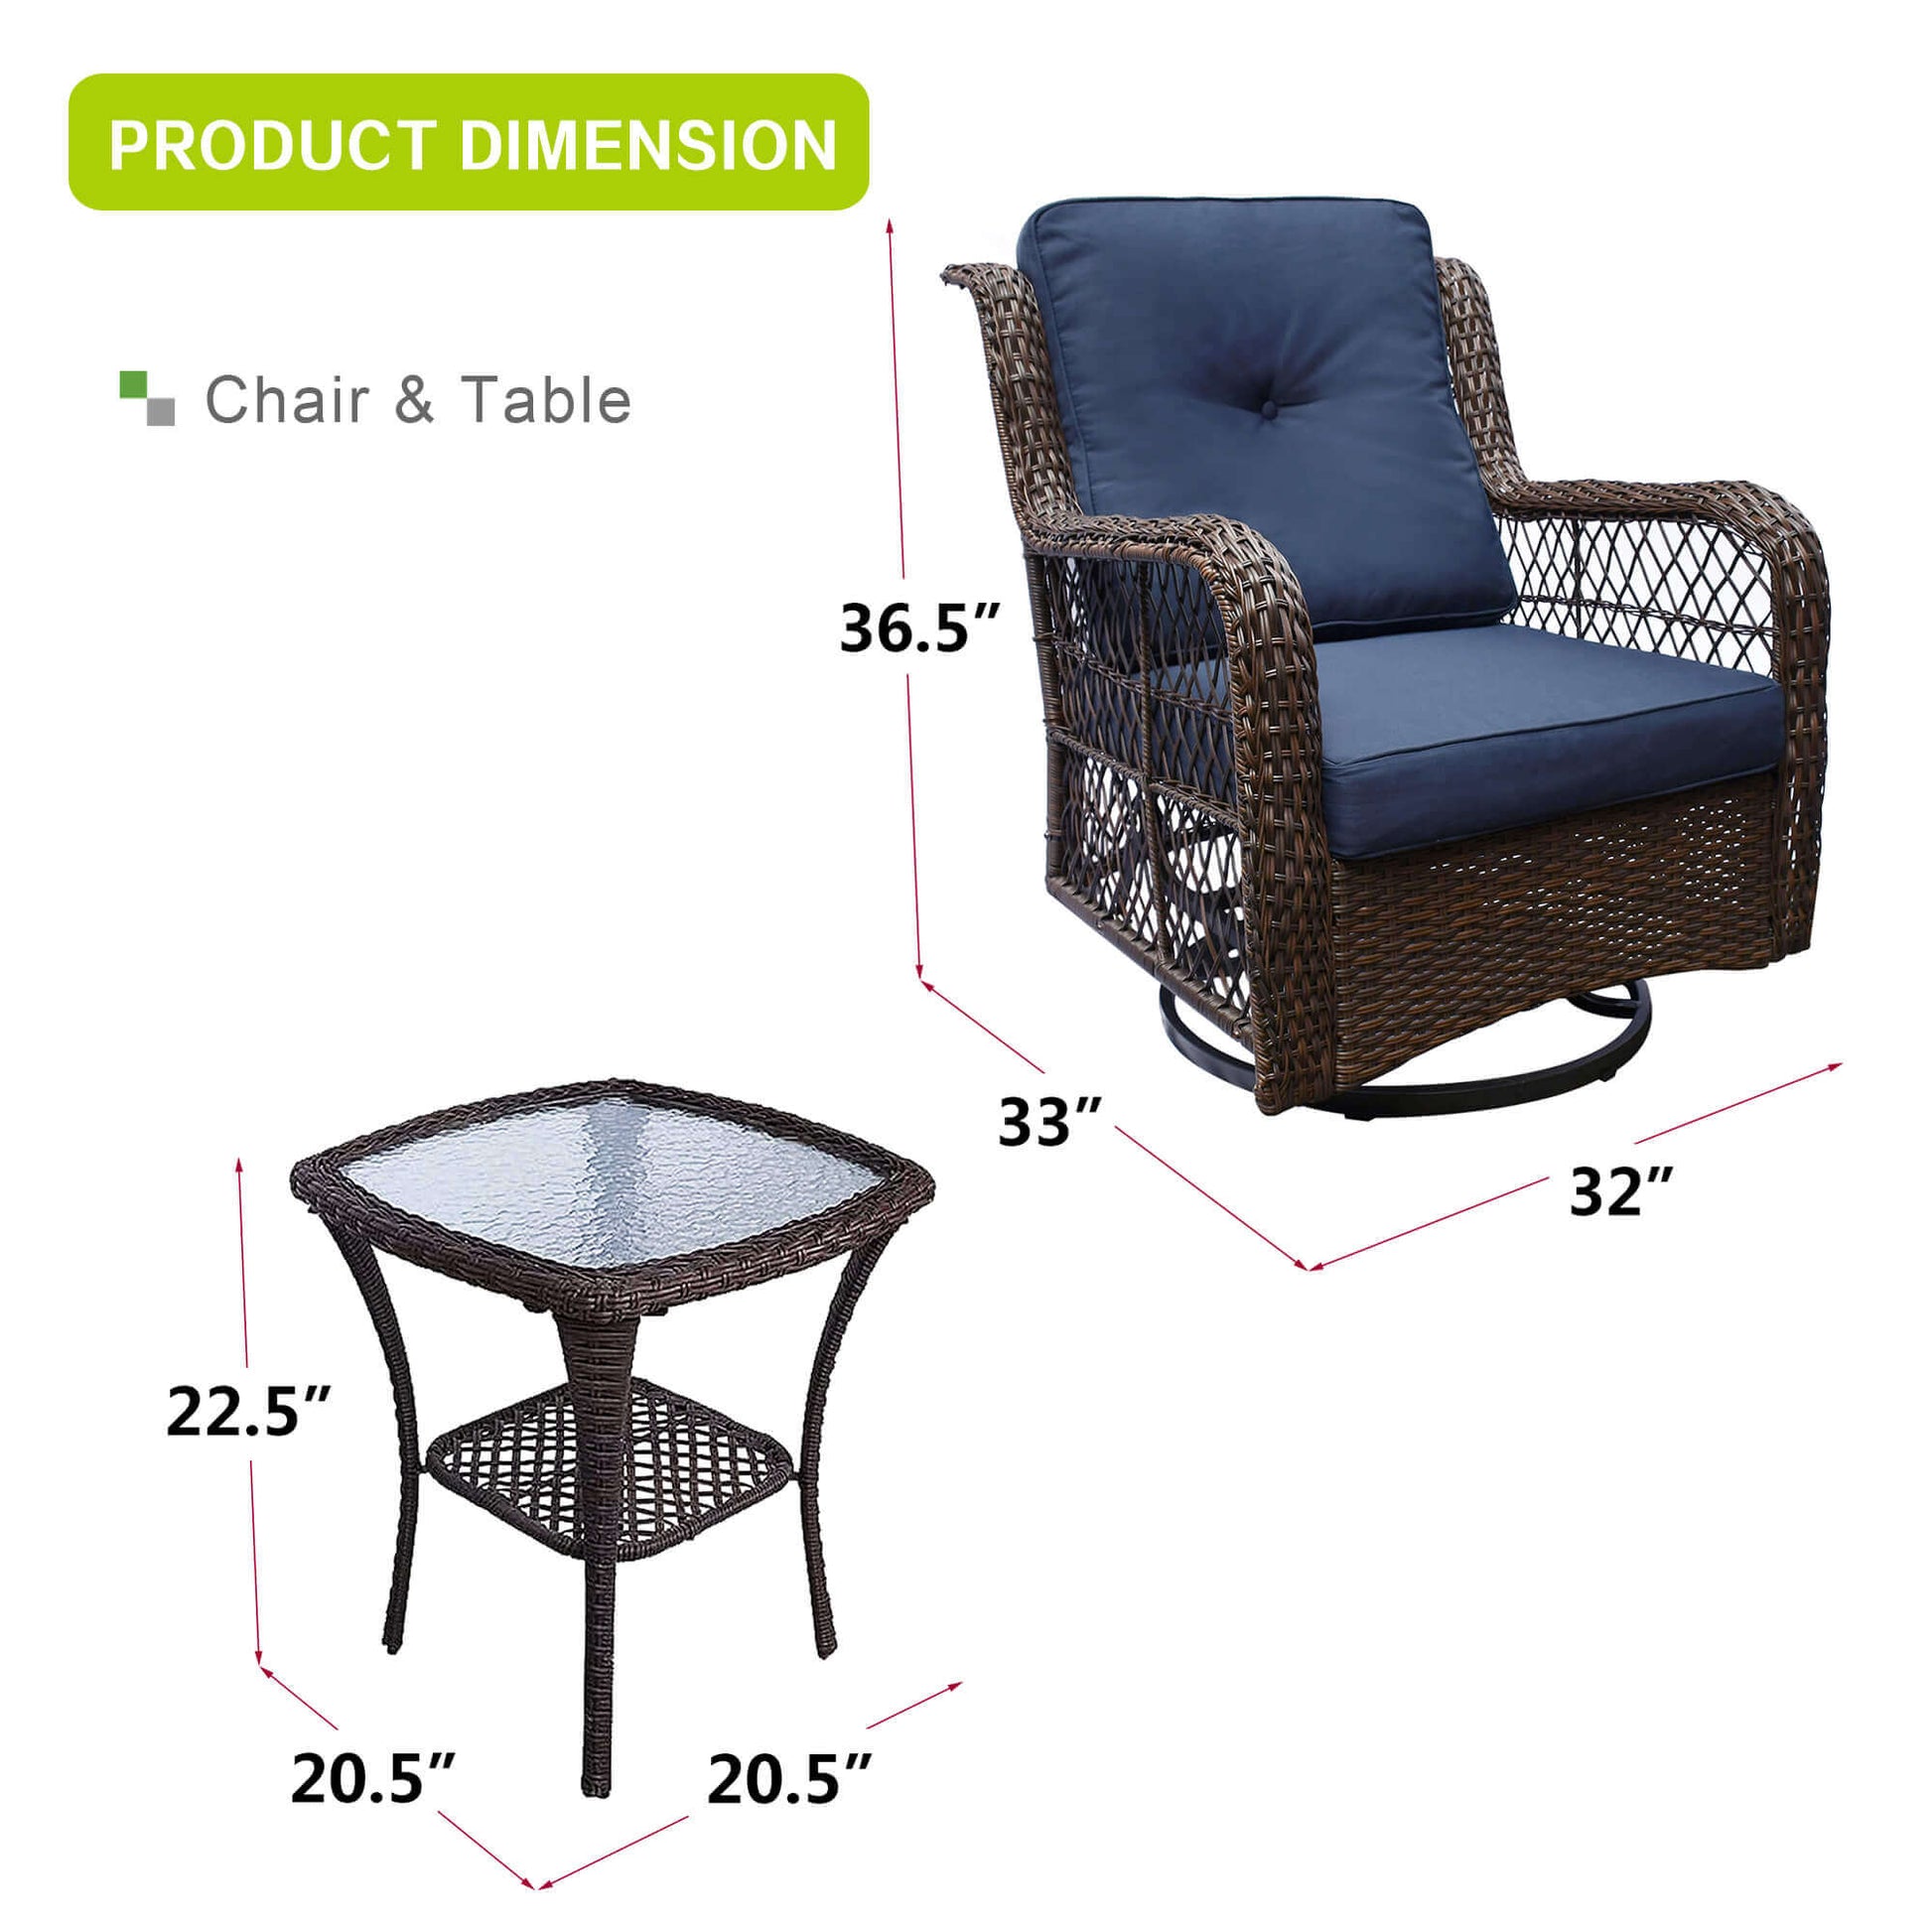 Outdoor Resin Wicker Swivel Rocker Patio Chair / 360-Degree Swivel Rocking Chairs and Tempered Glass Top Side Coffee Table (3 pcs)